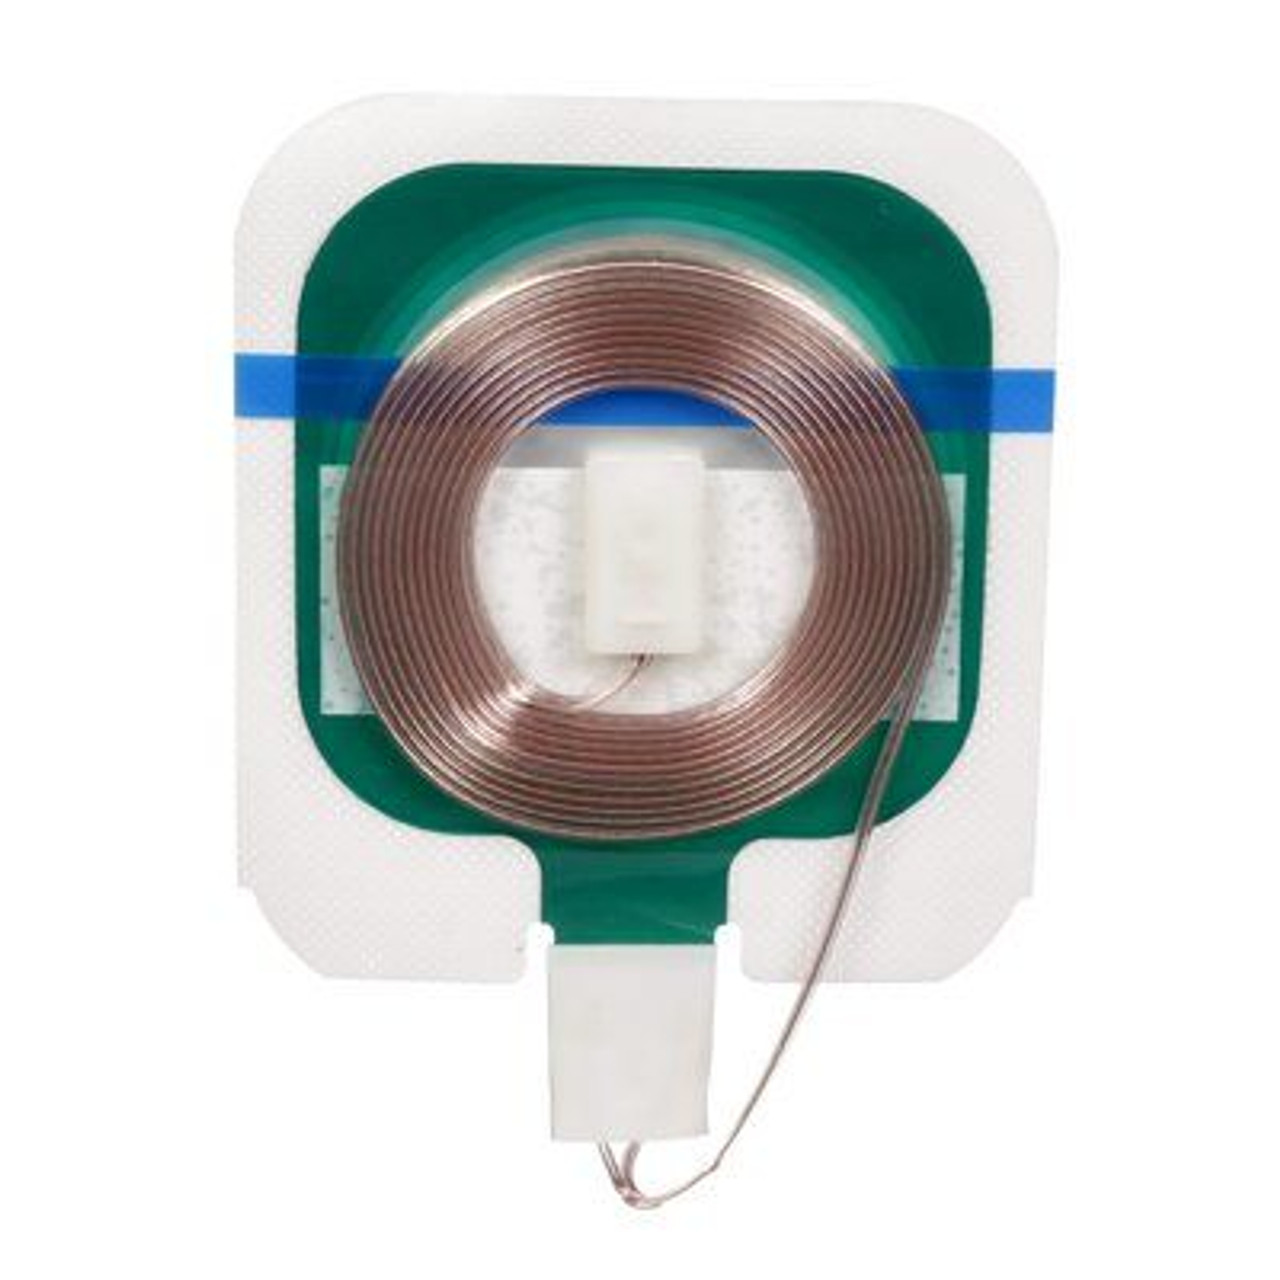 3M 9135 Universal Electrosurgical Pad GROUNDING ADULT ADHESIVE FOIL Disposable 9 ft CORD (40/PK) (3M-9135)